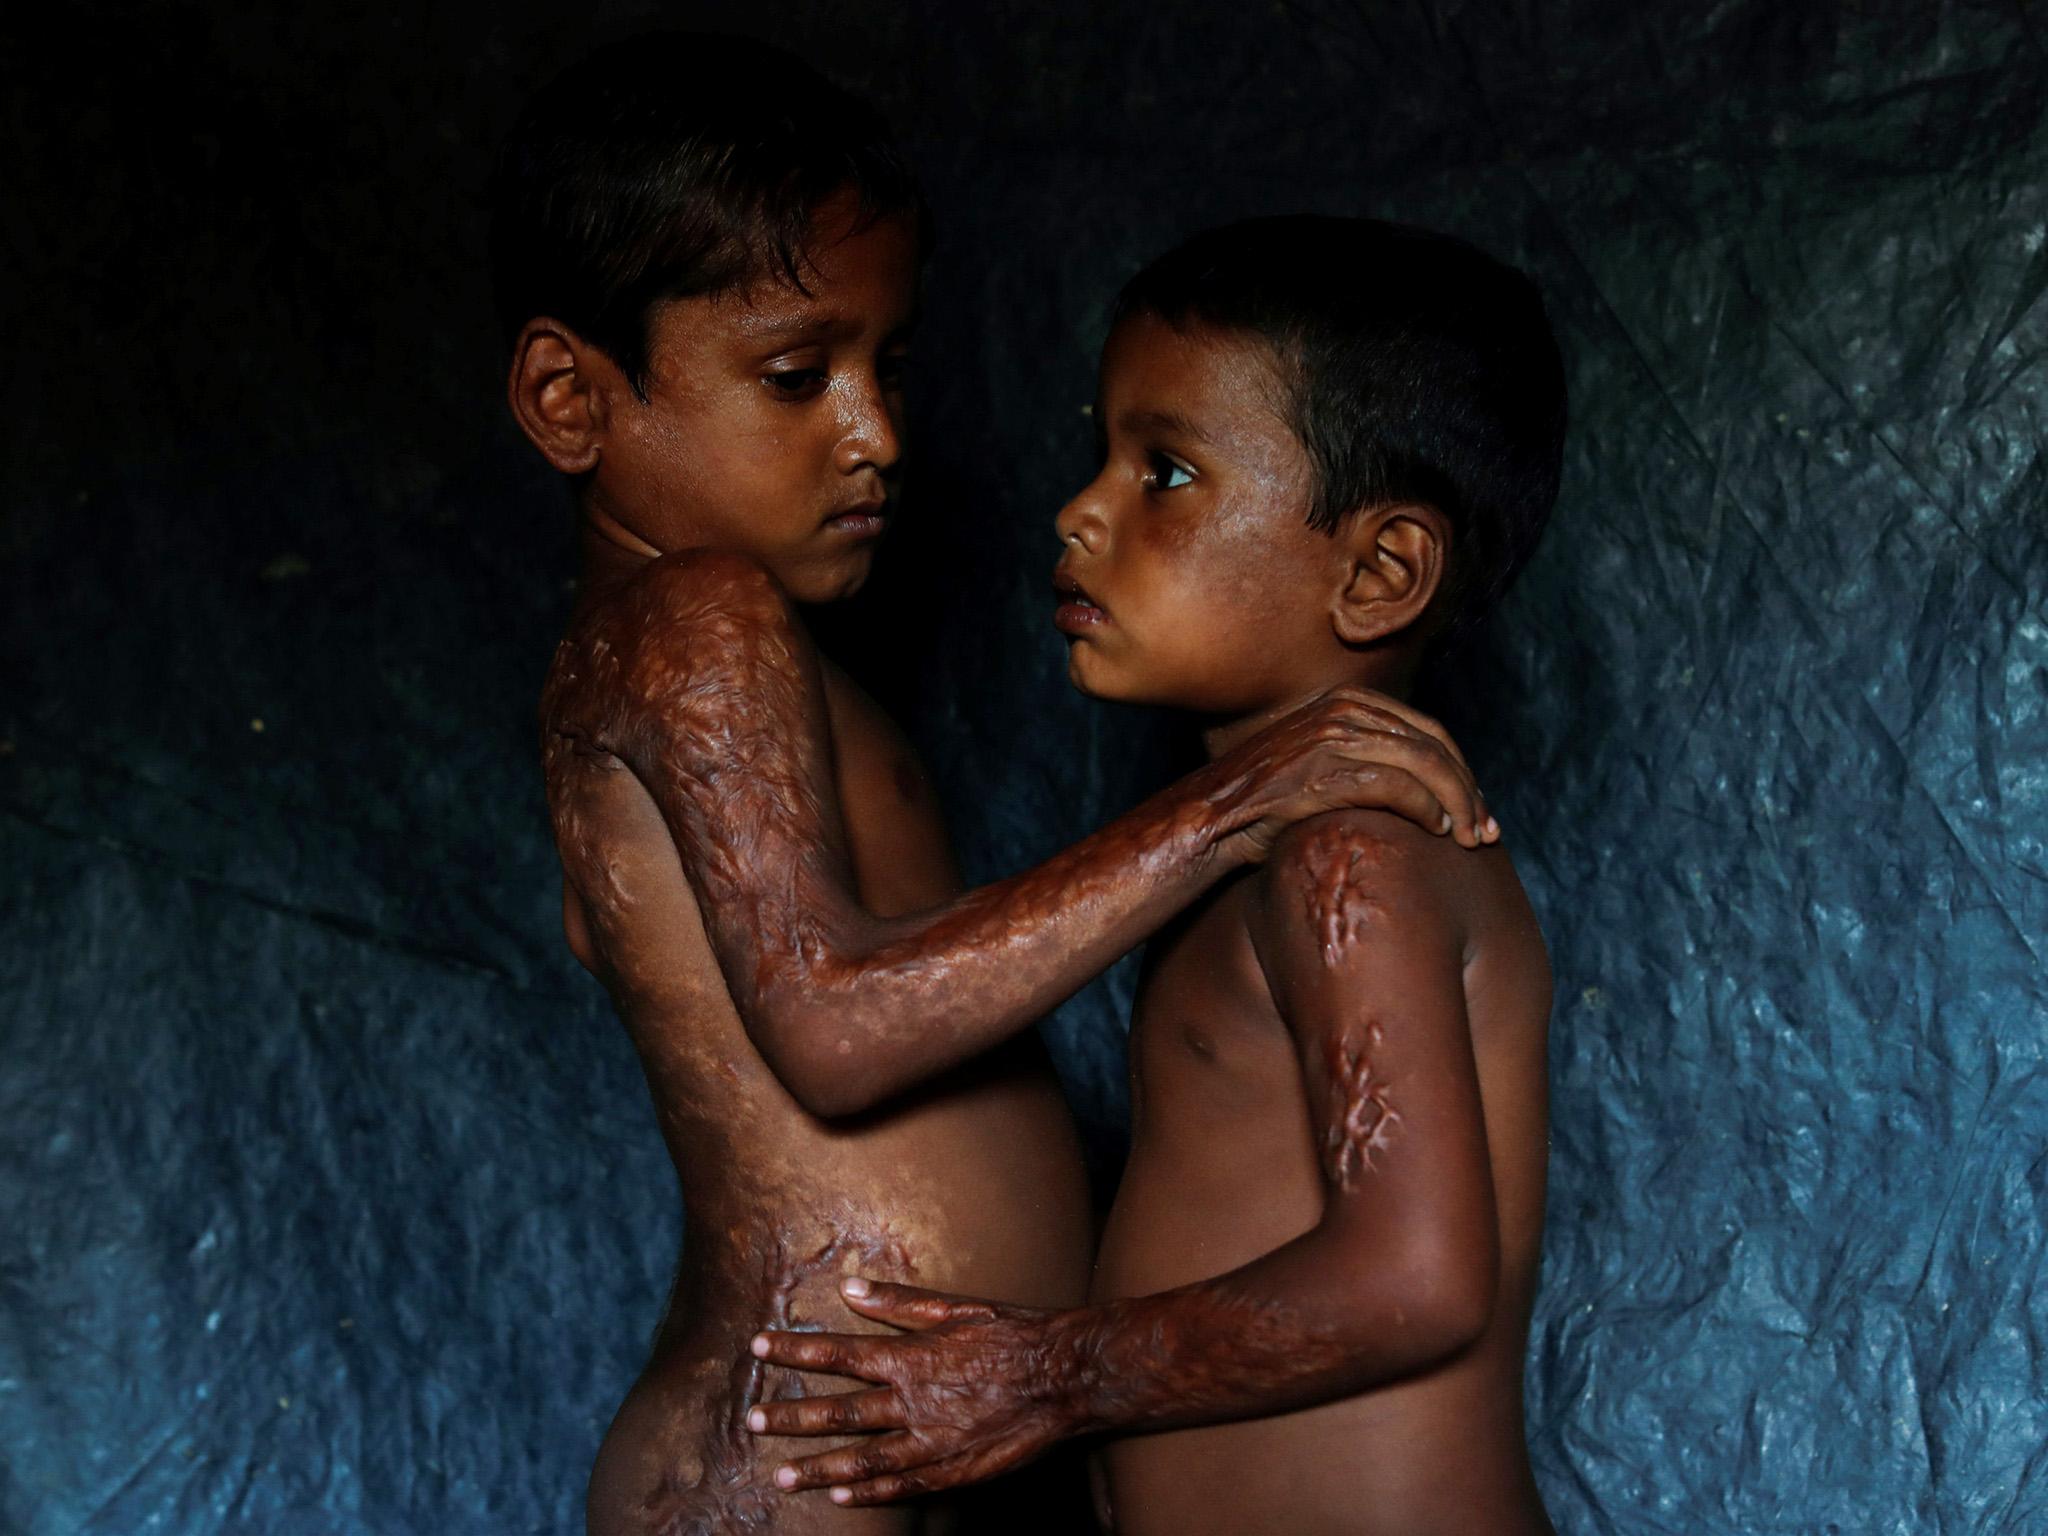 Rohingya refugees Mohamed Heron, 6, and his brother Mohamed Akter, 4, show the burns they suffered after Myanmar's armed forces fired rockets at their village